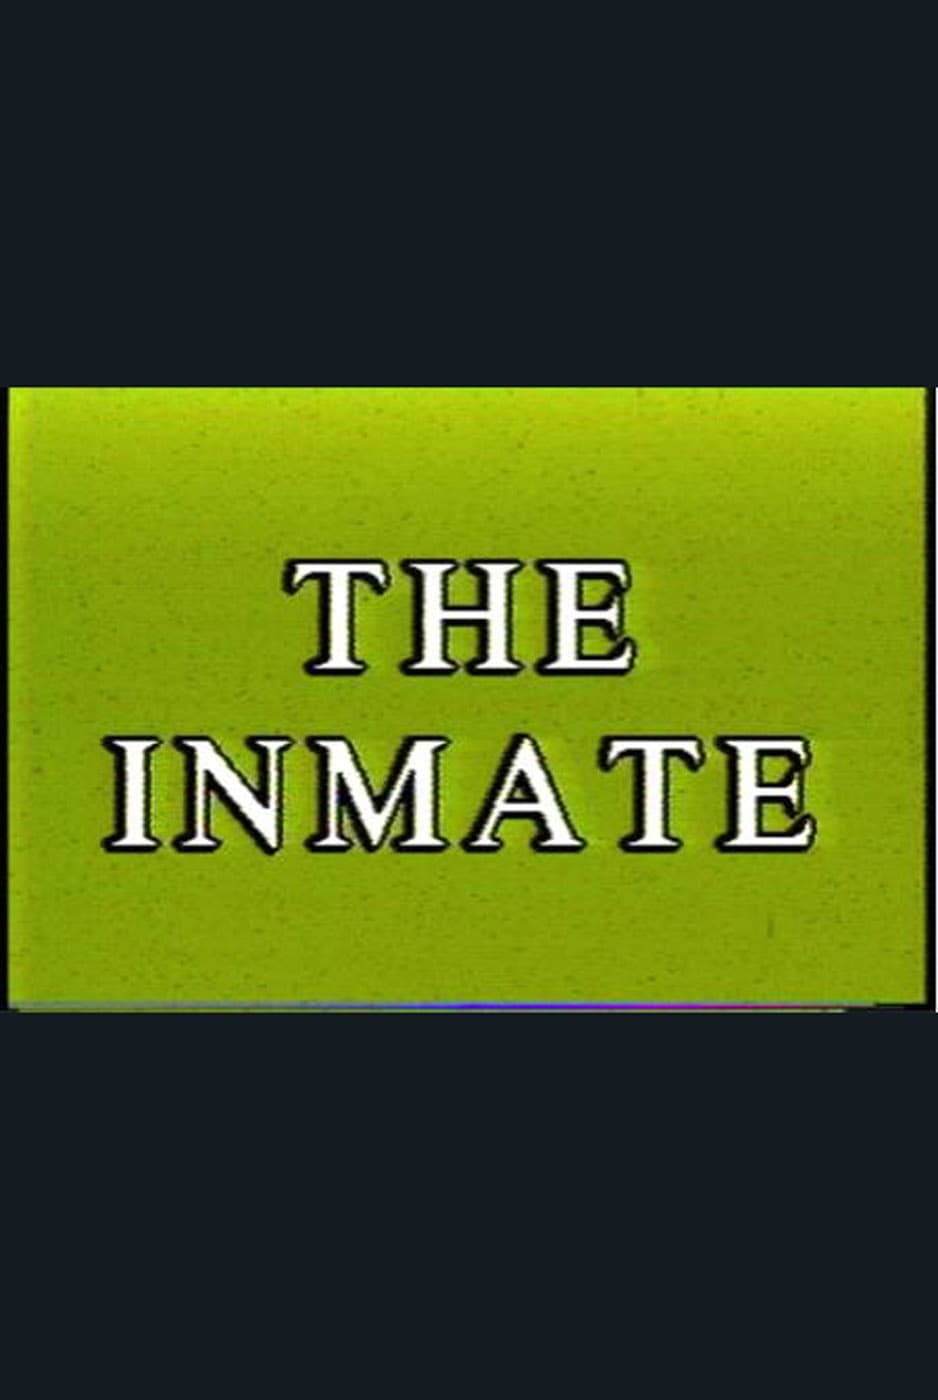 The Inmate (1997)